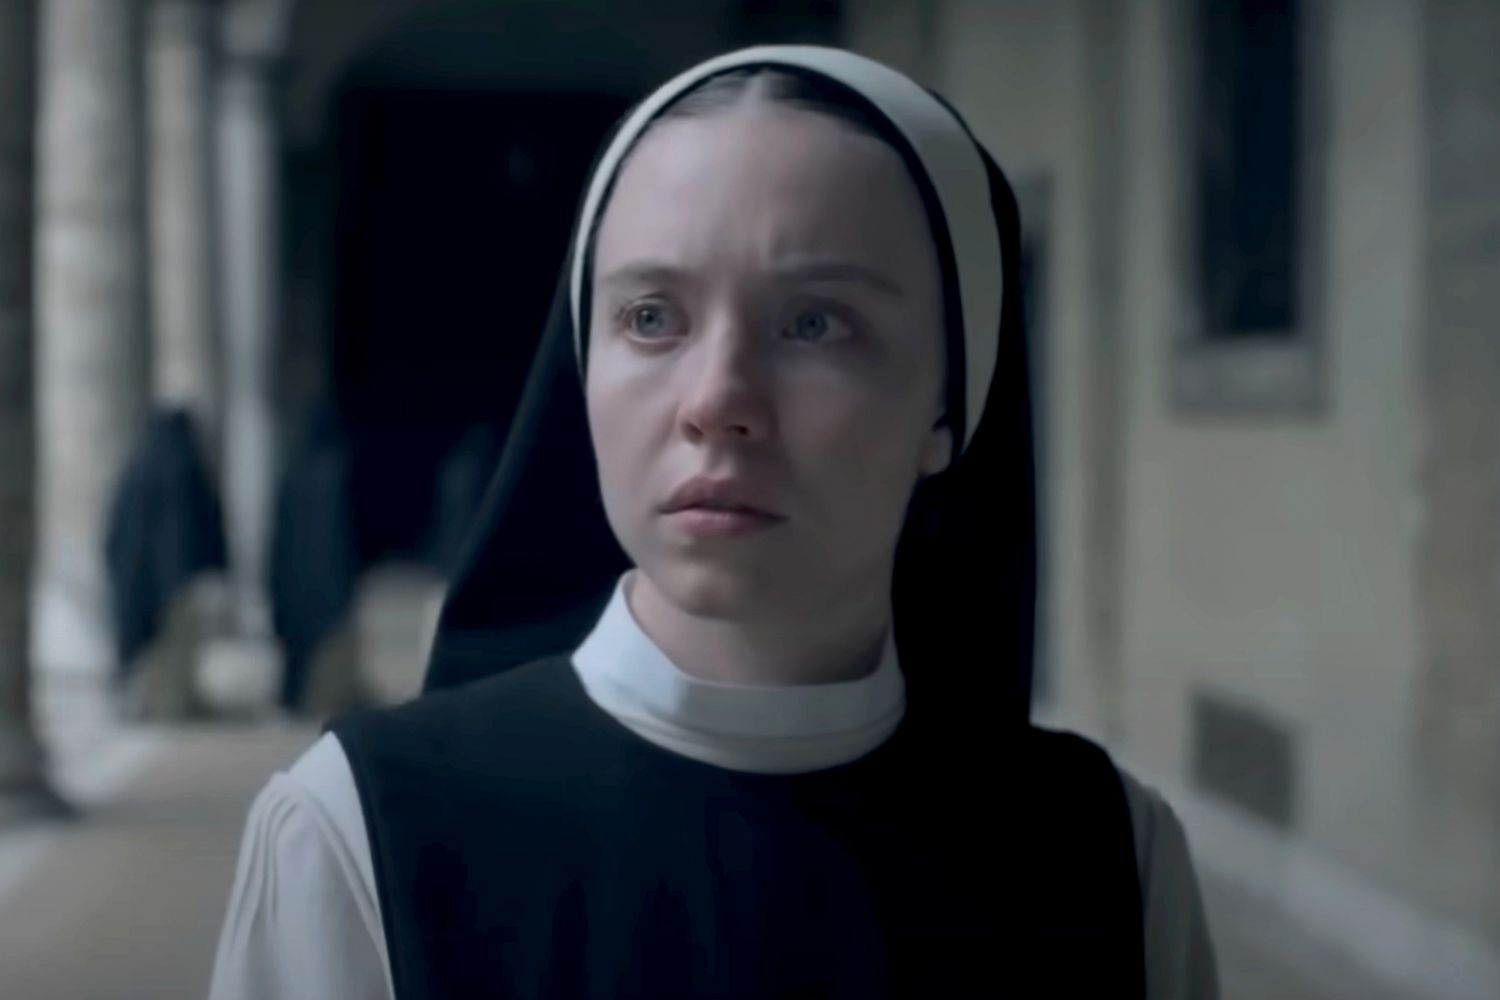 Sydney Sweeney plays Cecilia in Immaculate